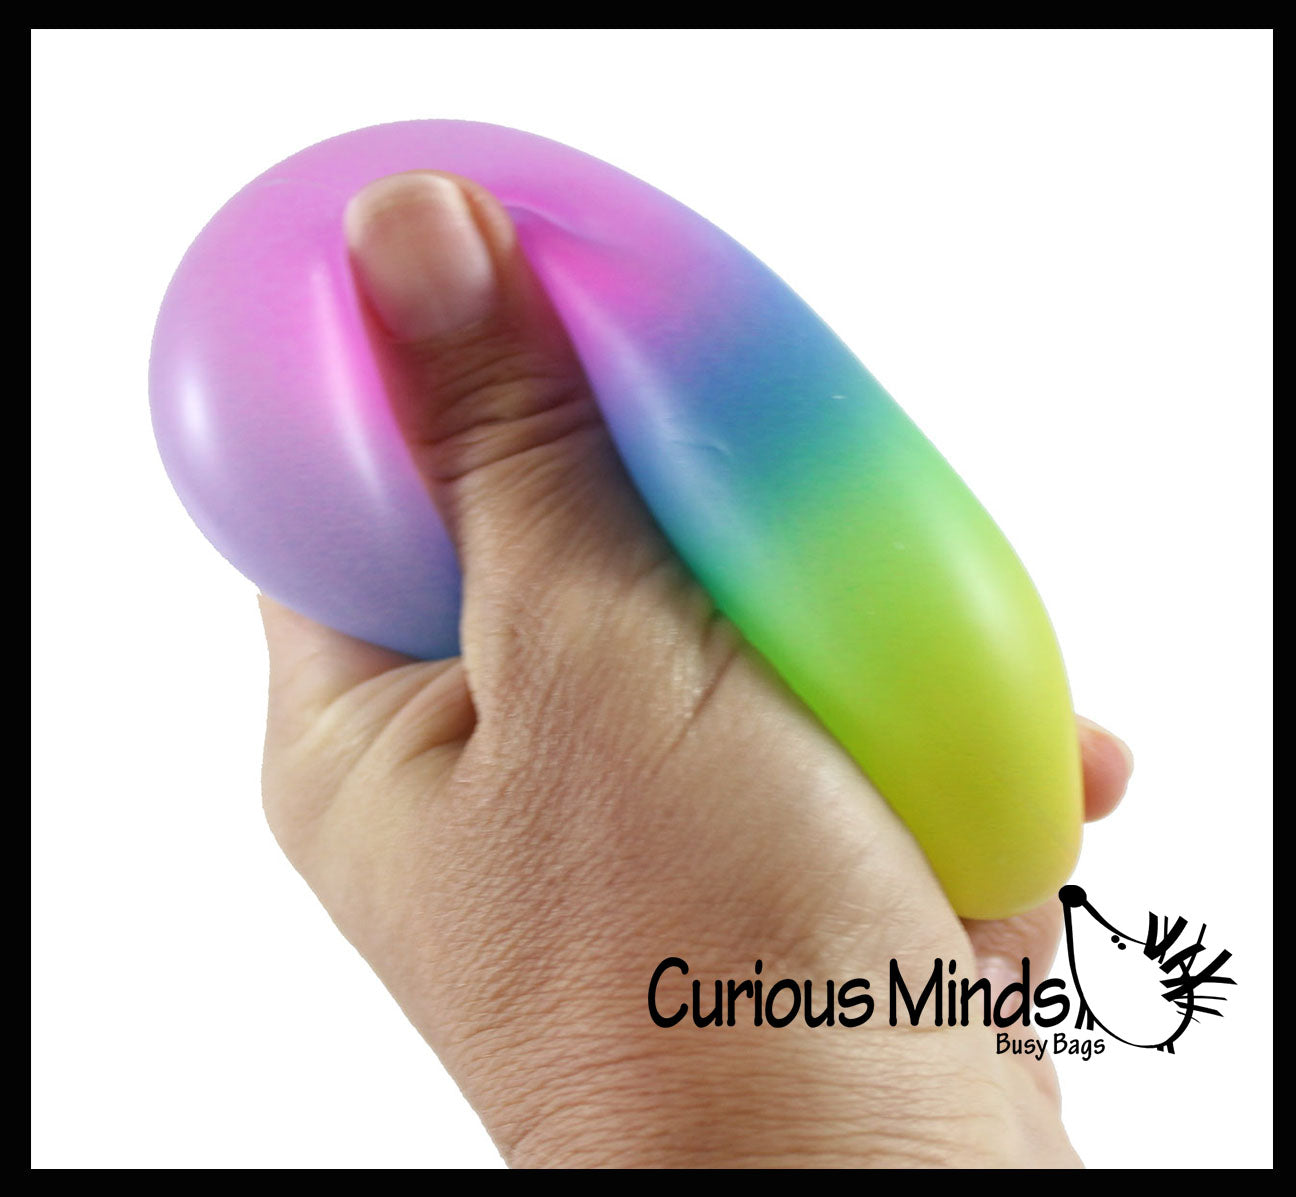 Rainbow Sugar Ball - Thick Glue/Gel Stretch Ball - Ultra Squishy and Moldable Slow Rise Relaxing Sensory Fidget Stress Toy